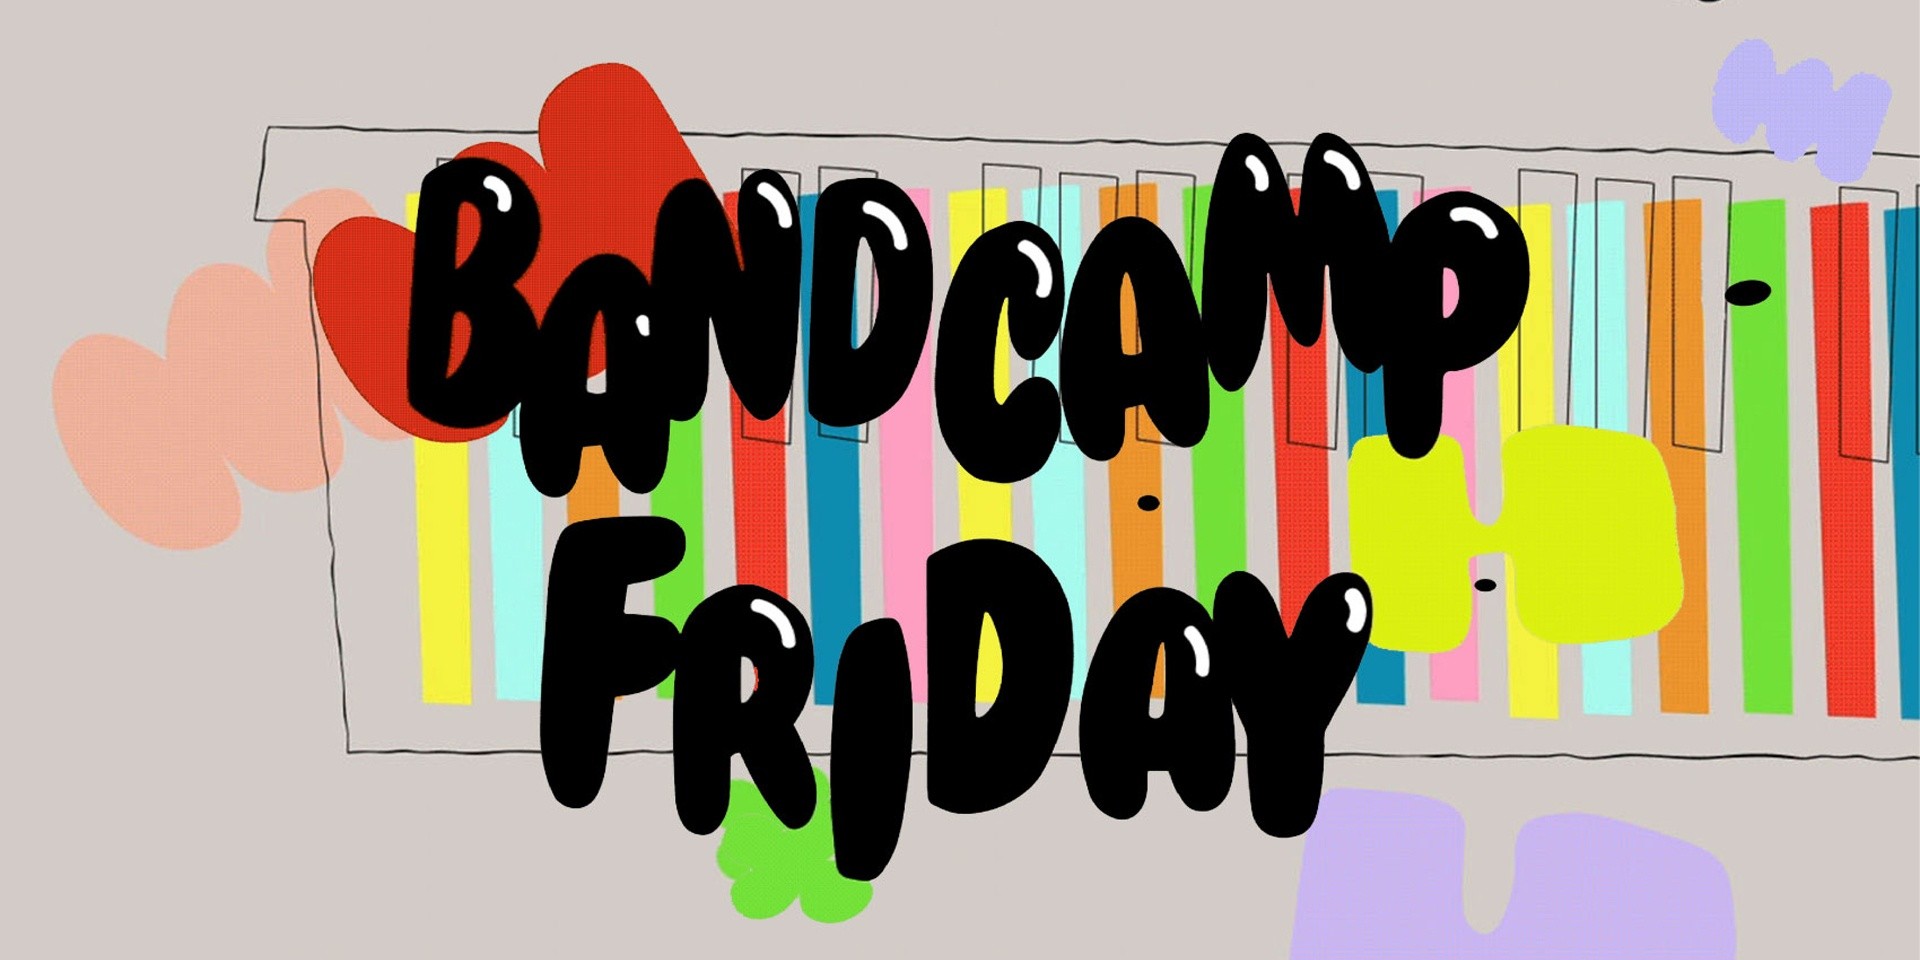 Bandcamp Fridays, which raked in $40 Million for musicians during the COVID-19 pandemic, will extend into 2021